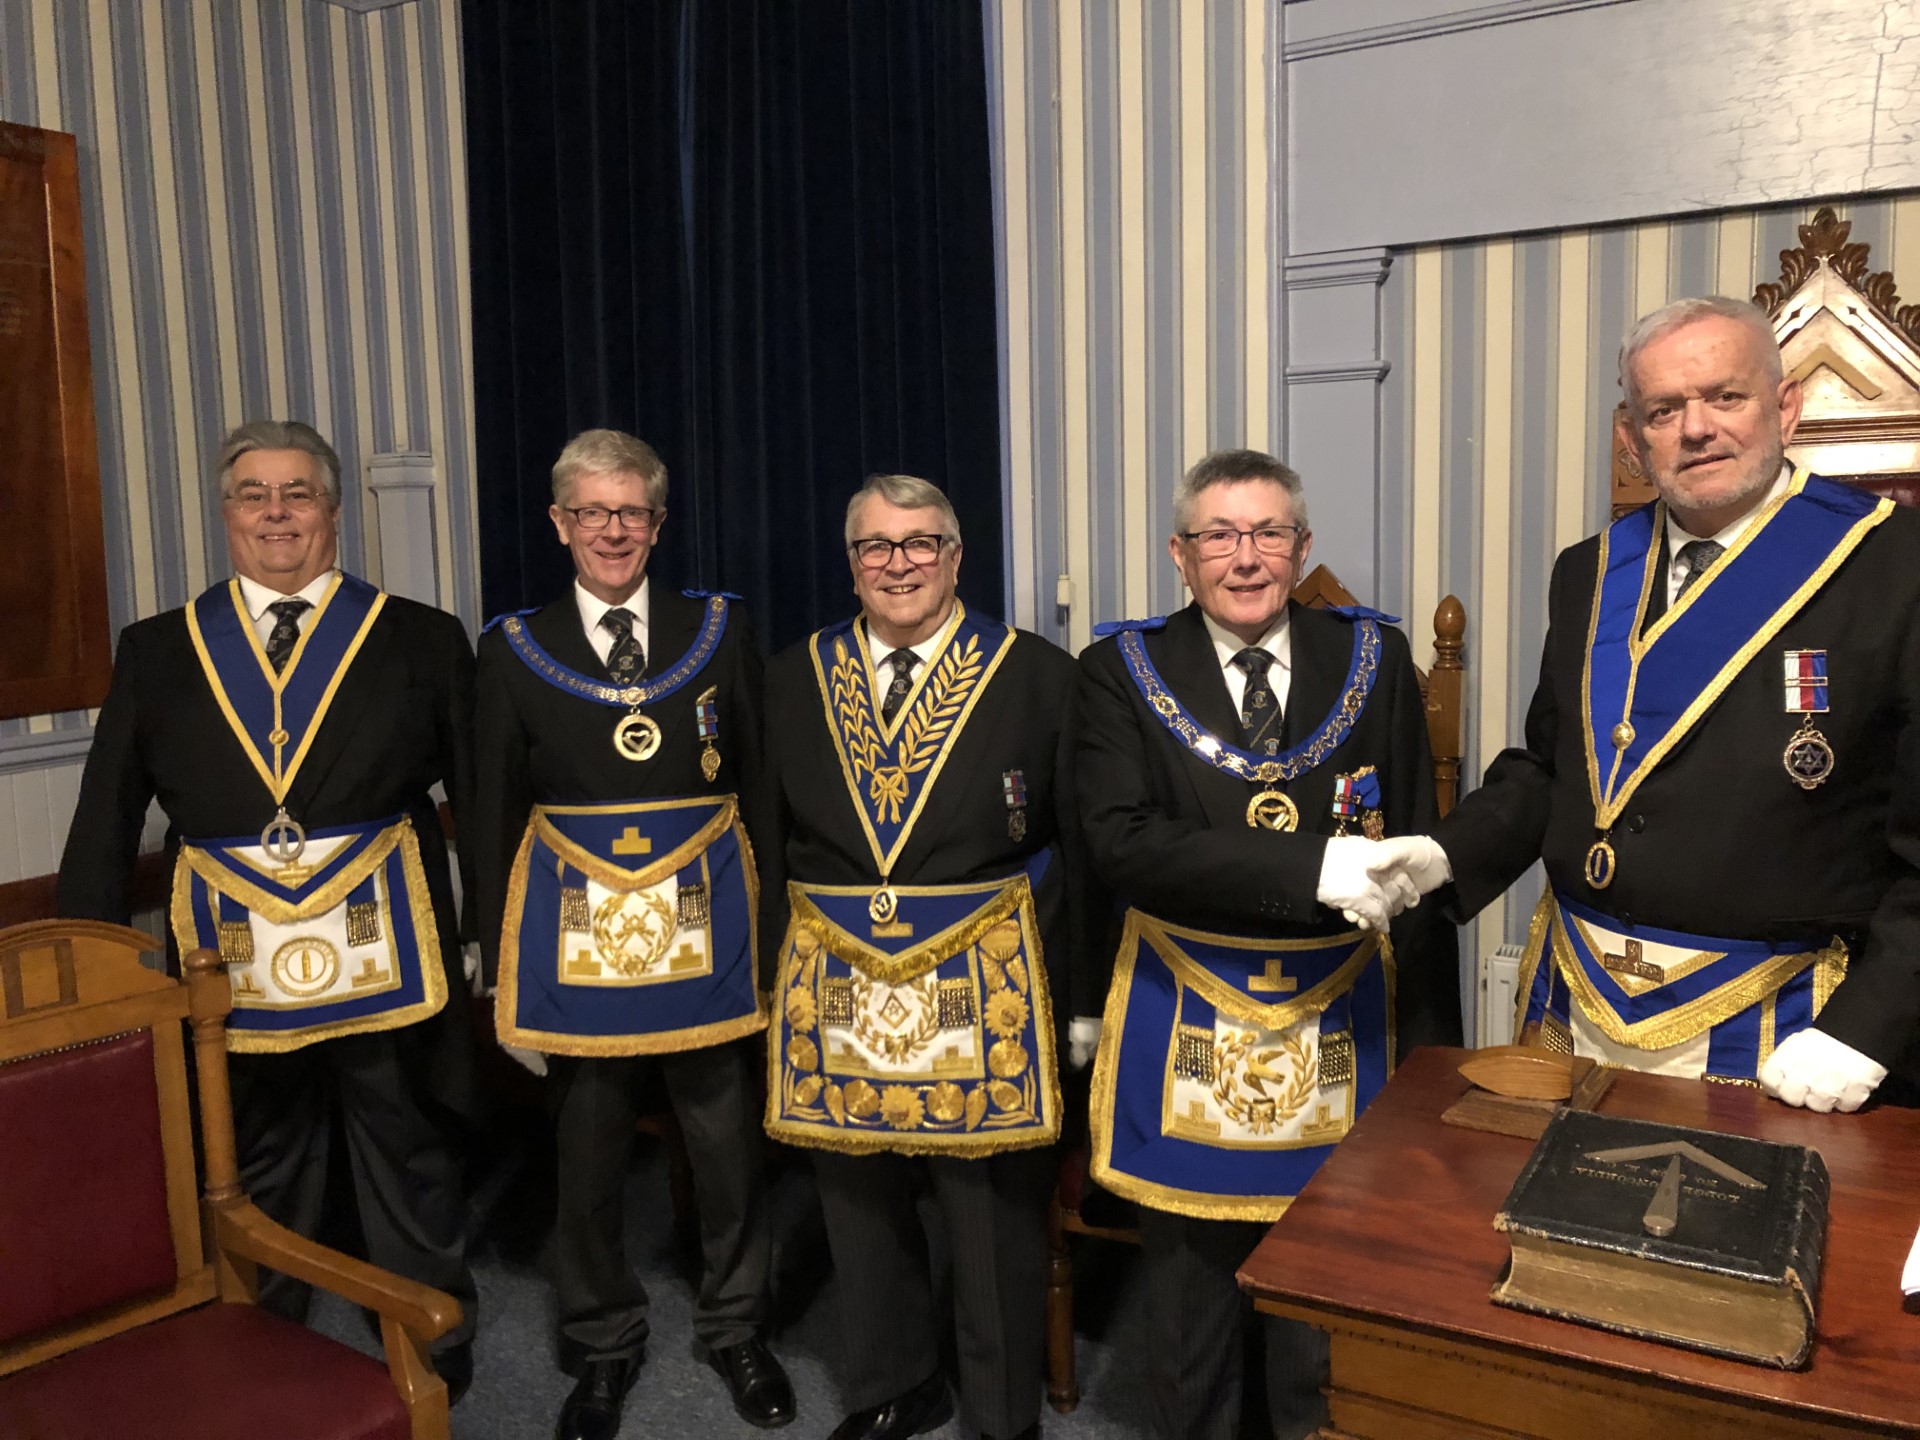 Torquay Freemasons at the Installation Meeting of Concordia Lodge, which was formed in India in 1905 and moved to England in 1966